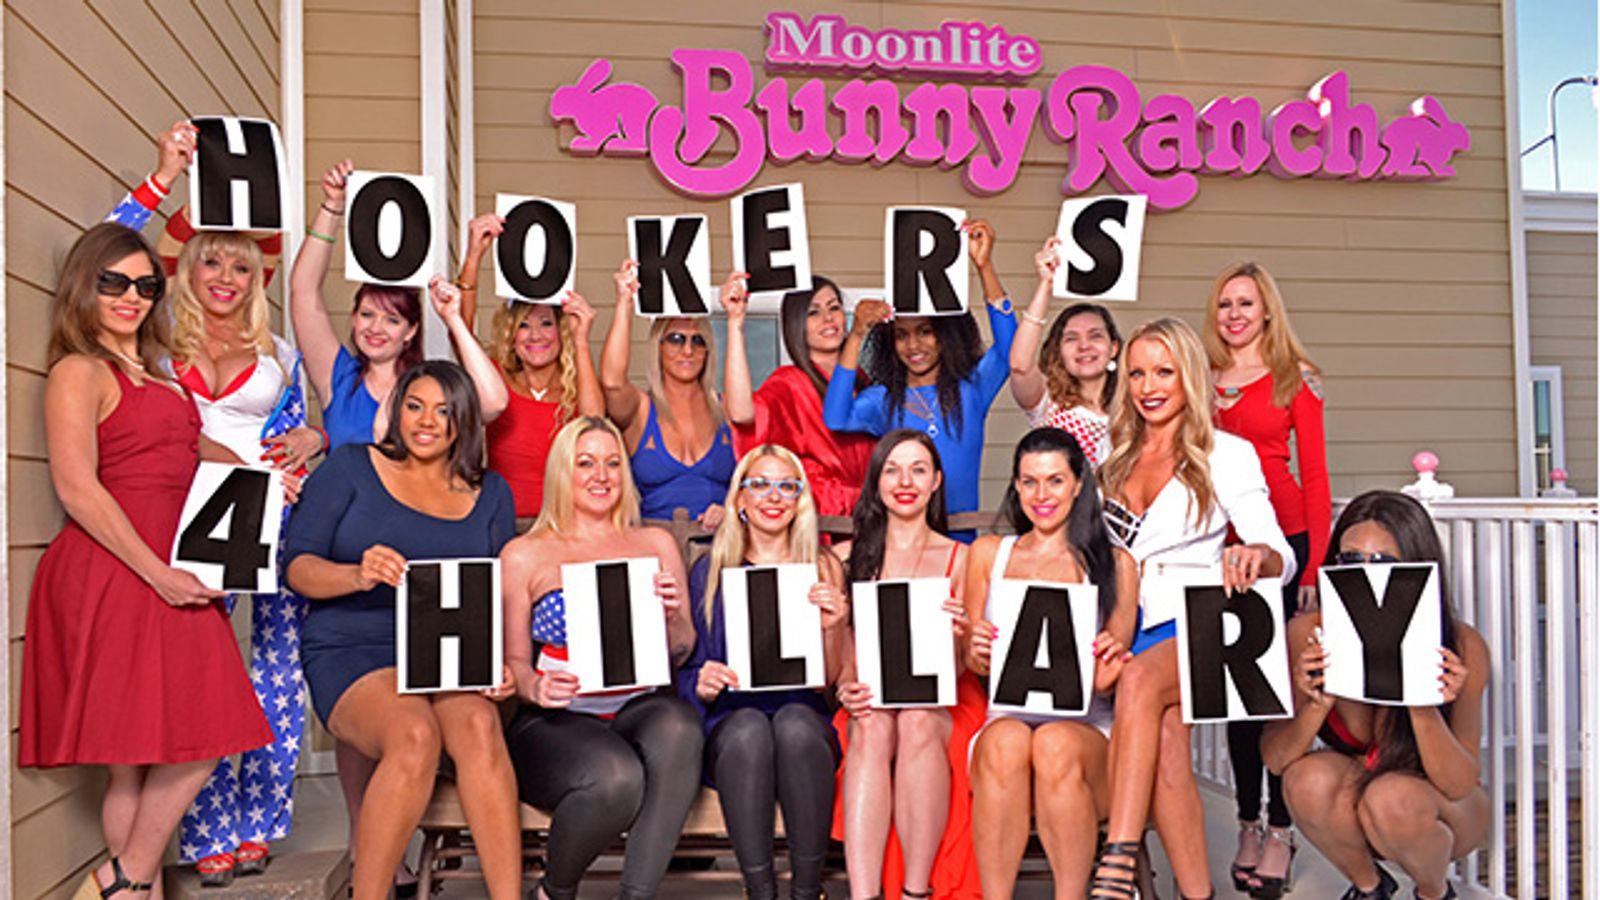 Bunny Ranch Sex Workers Endorse Hillary Clinton For President